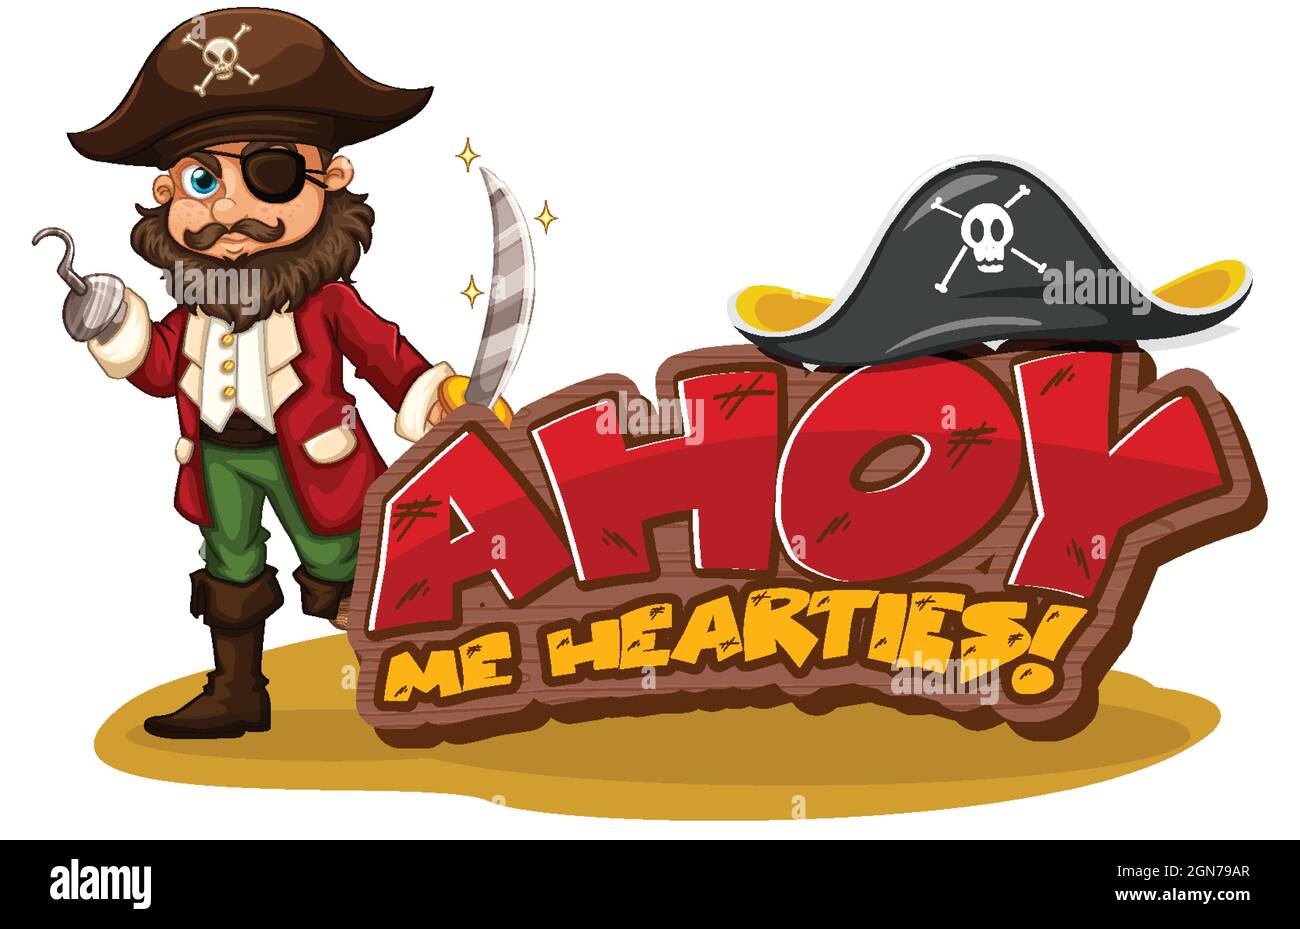 Pirate slang concept with Ahoy Me Hearties banner and a pirate cartoon character illustration Stock Vector